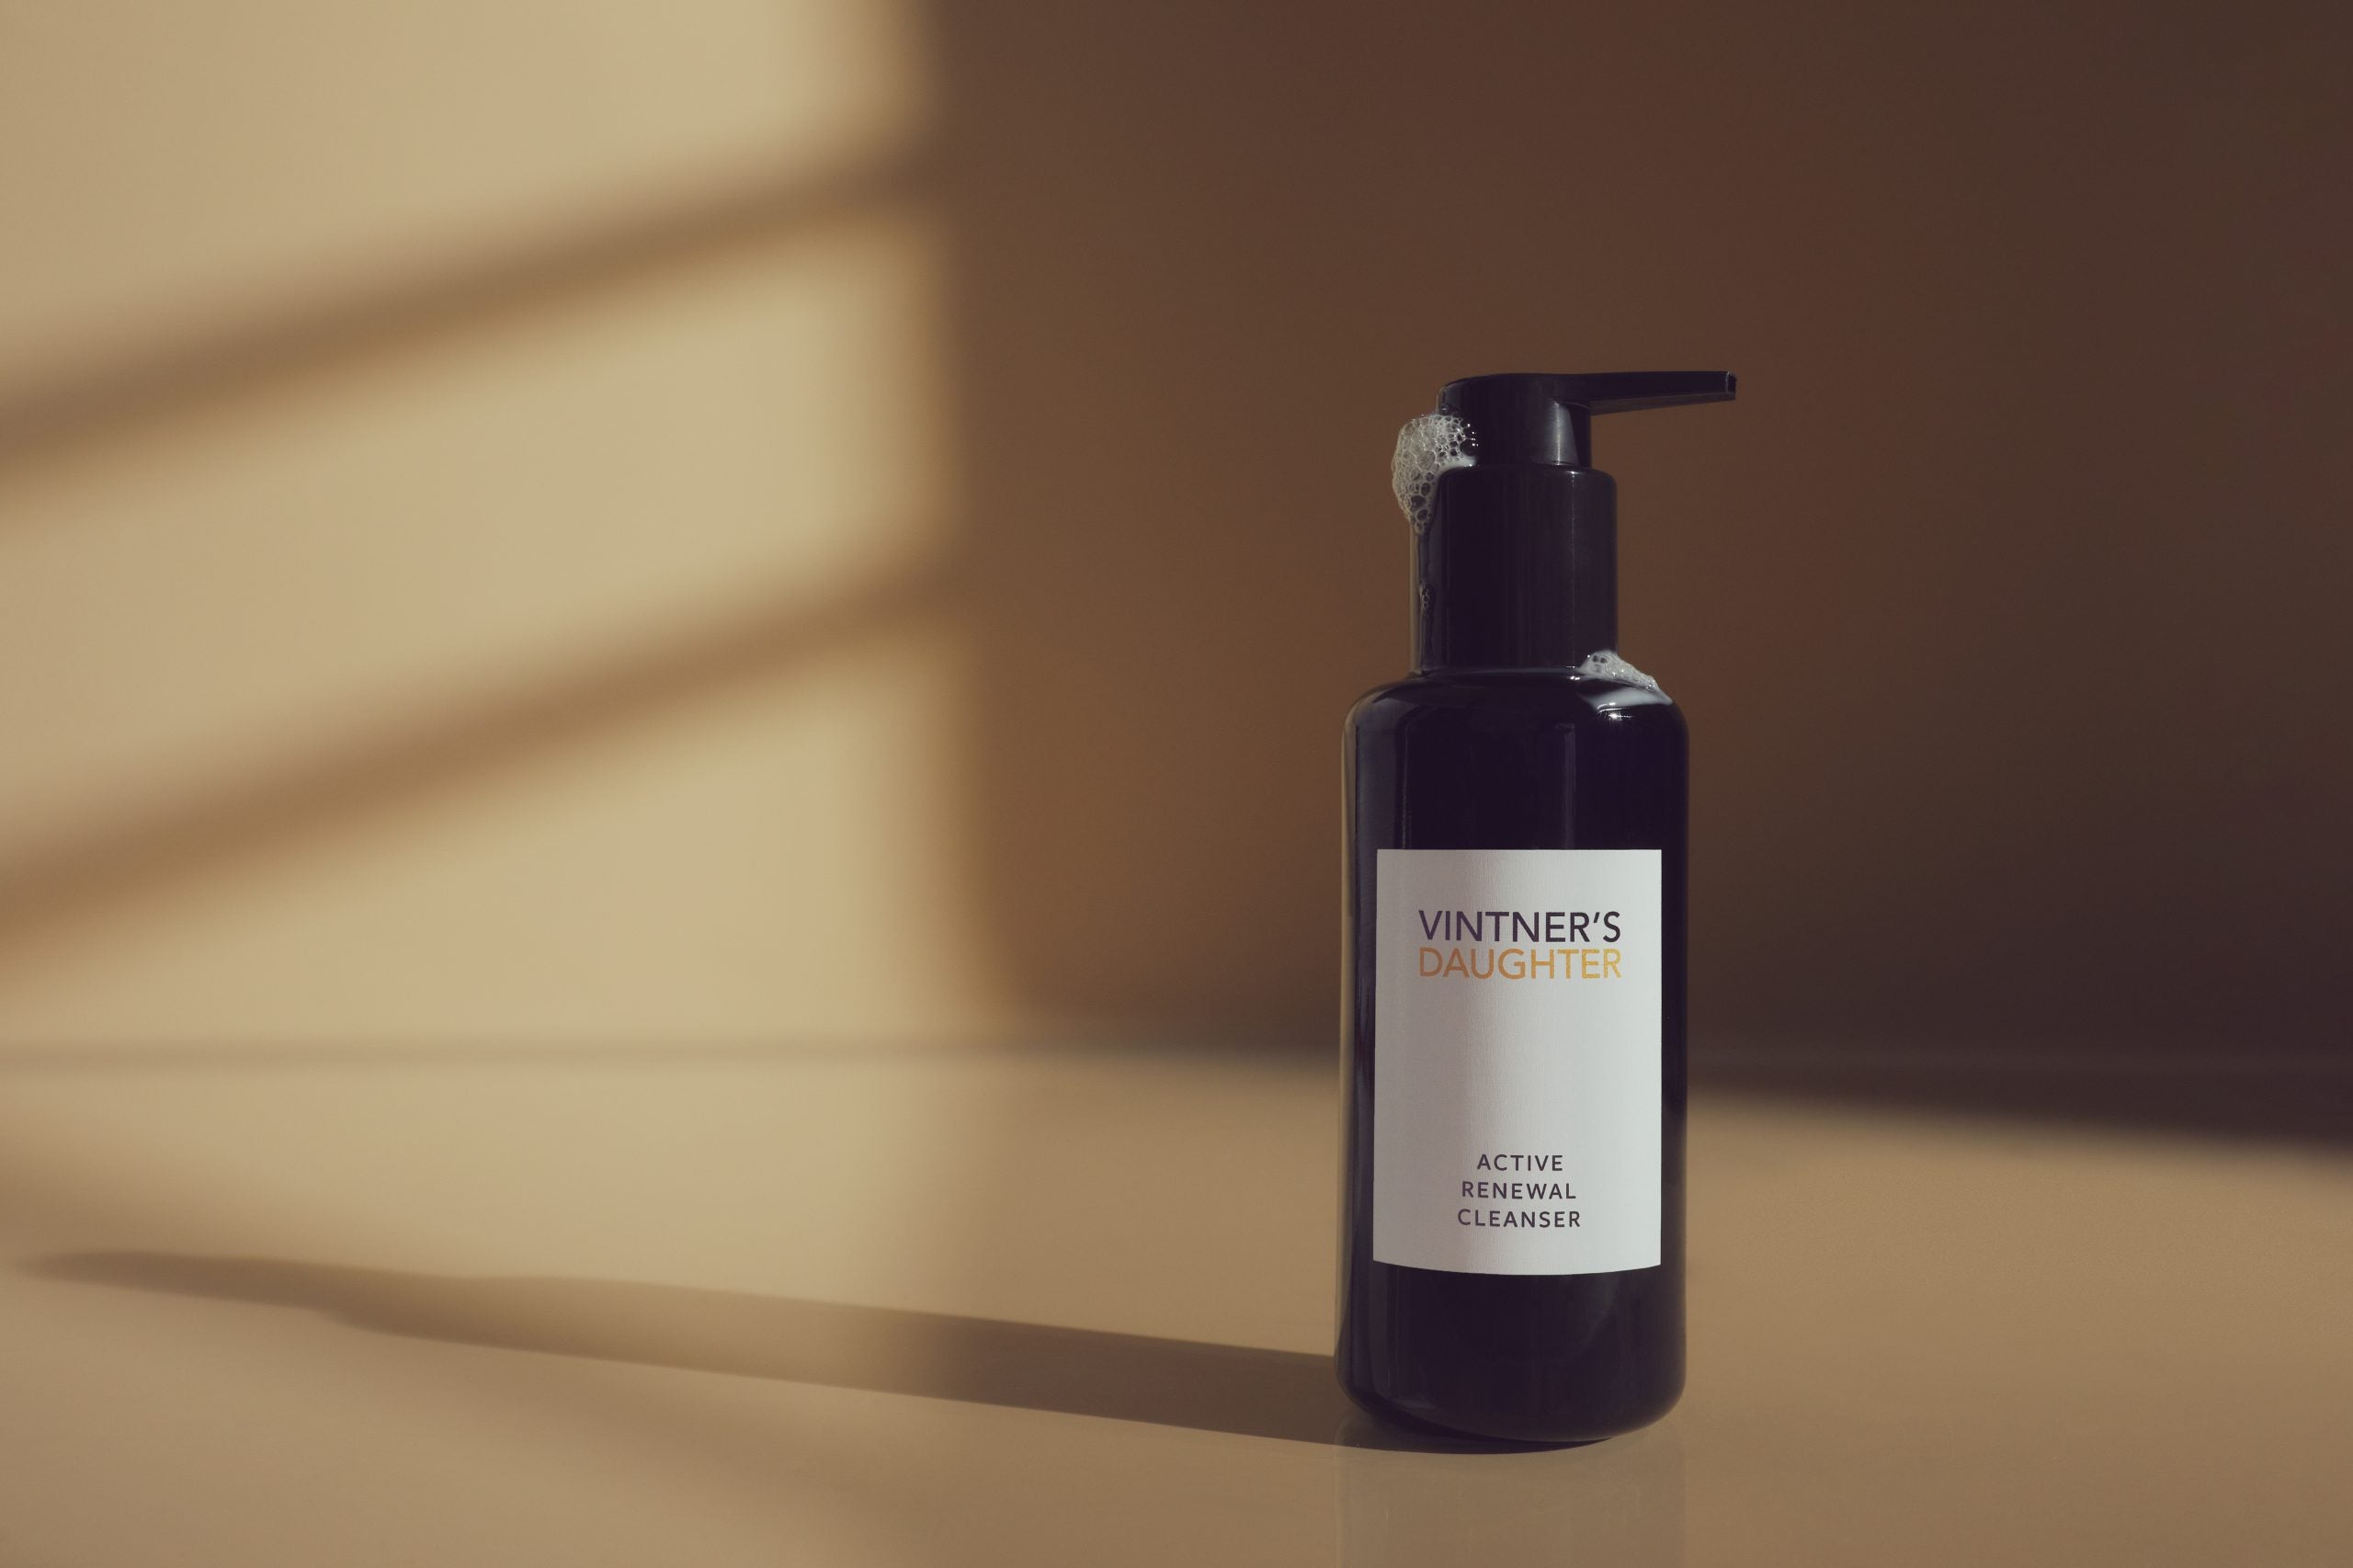 Vintner’s Daughter Launches Active Renewal Cleanser In Celebration Of Ten Years